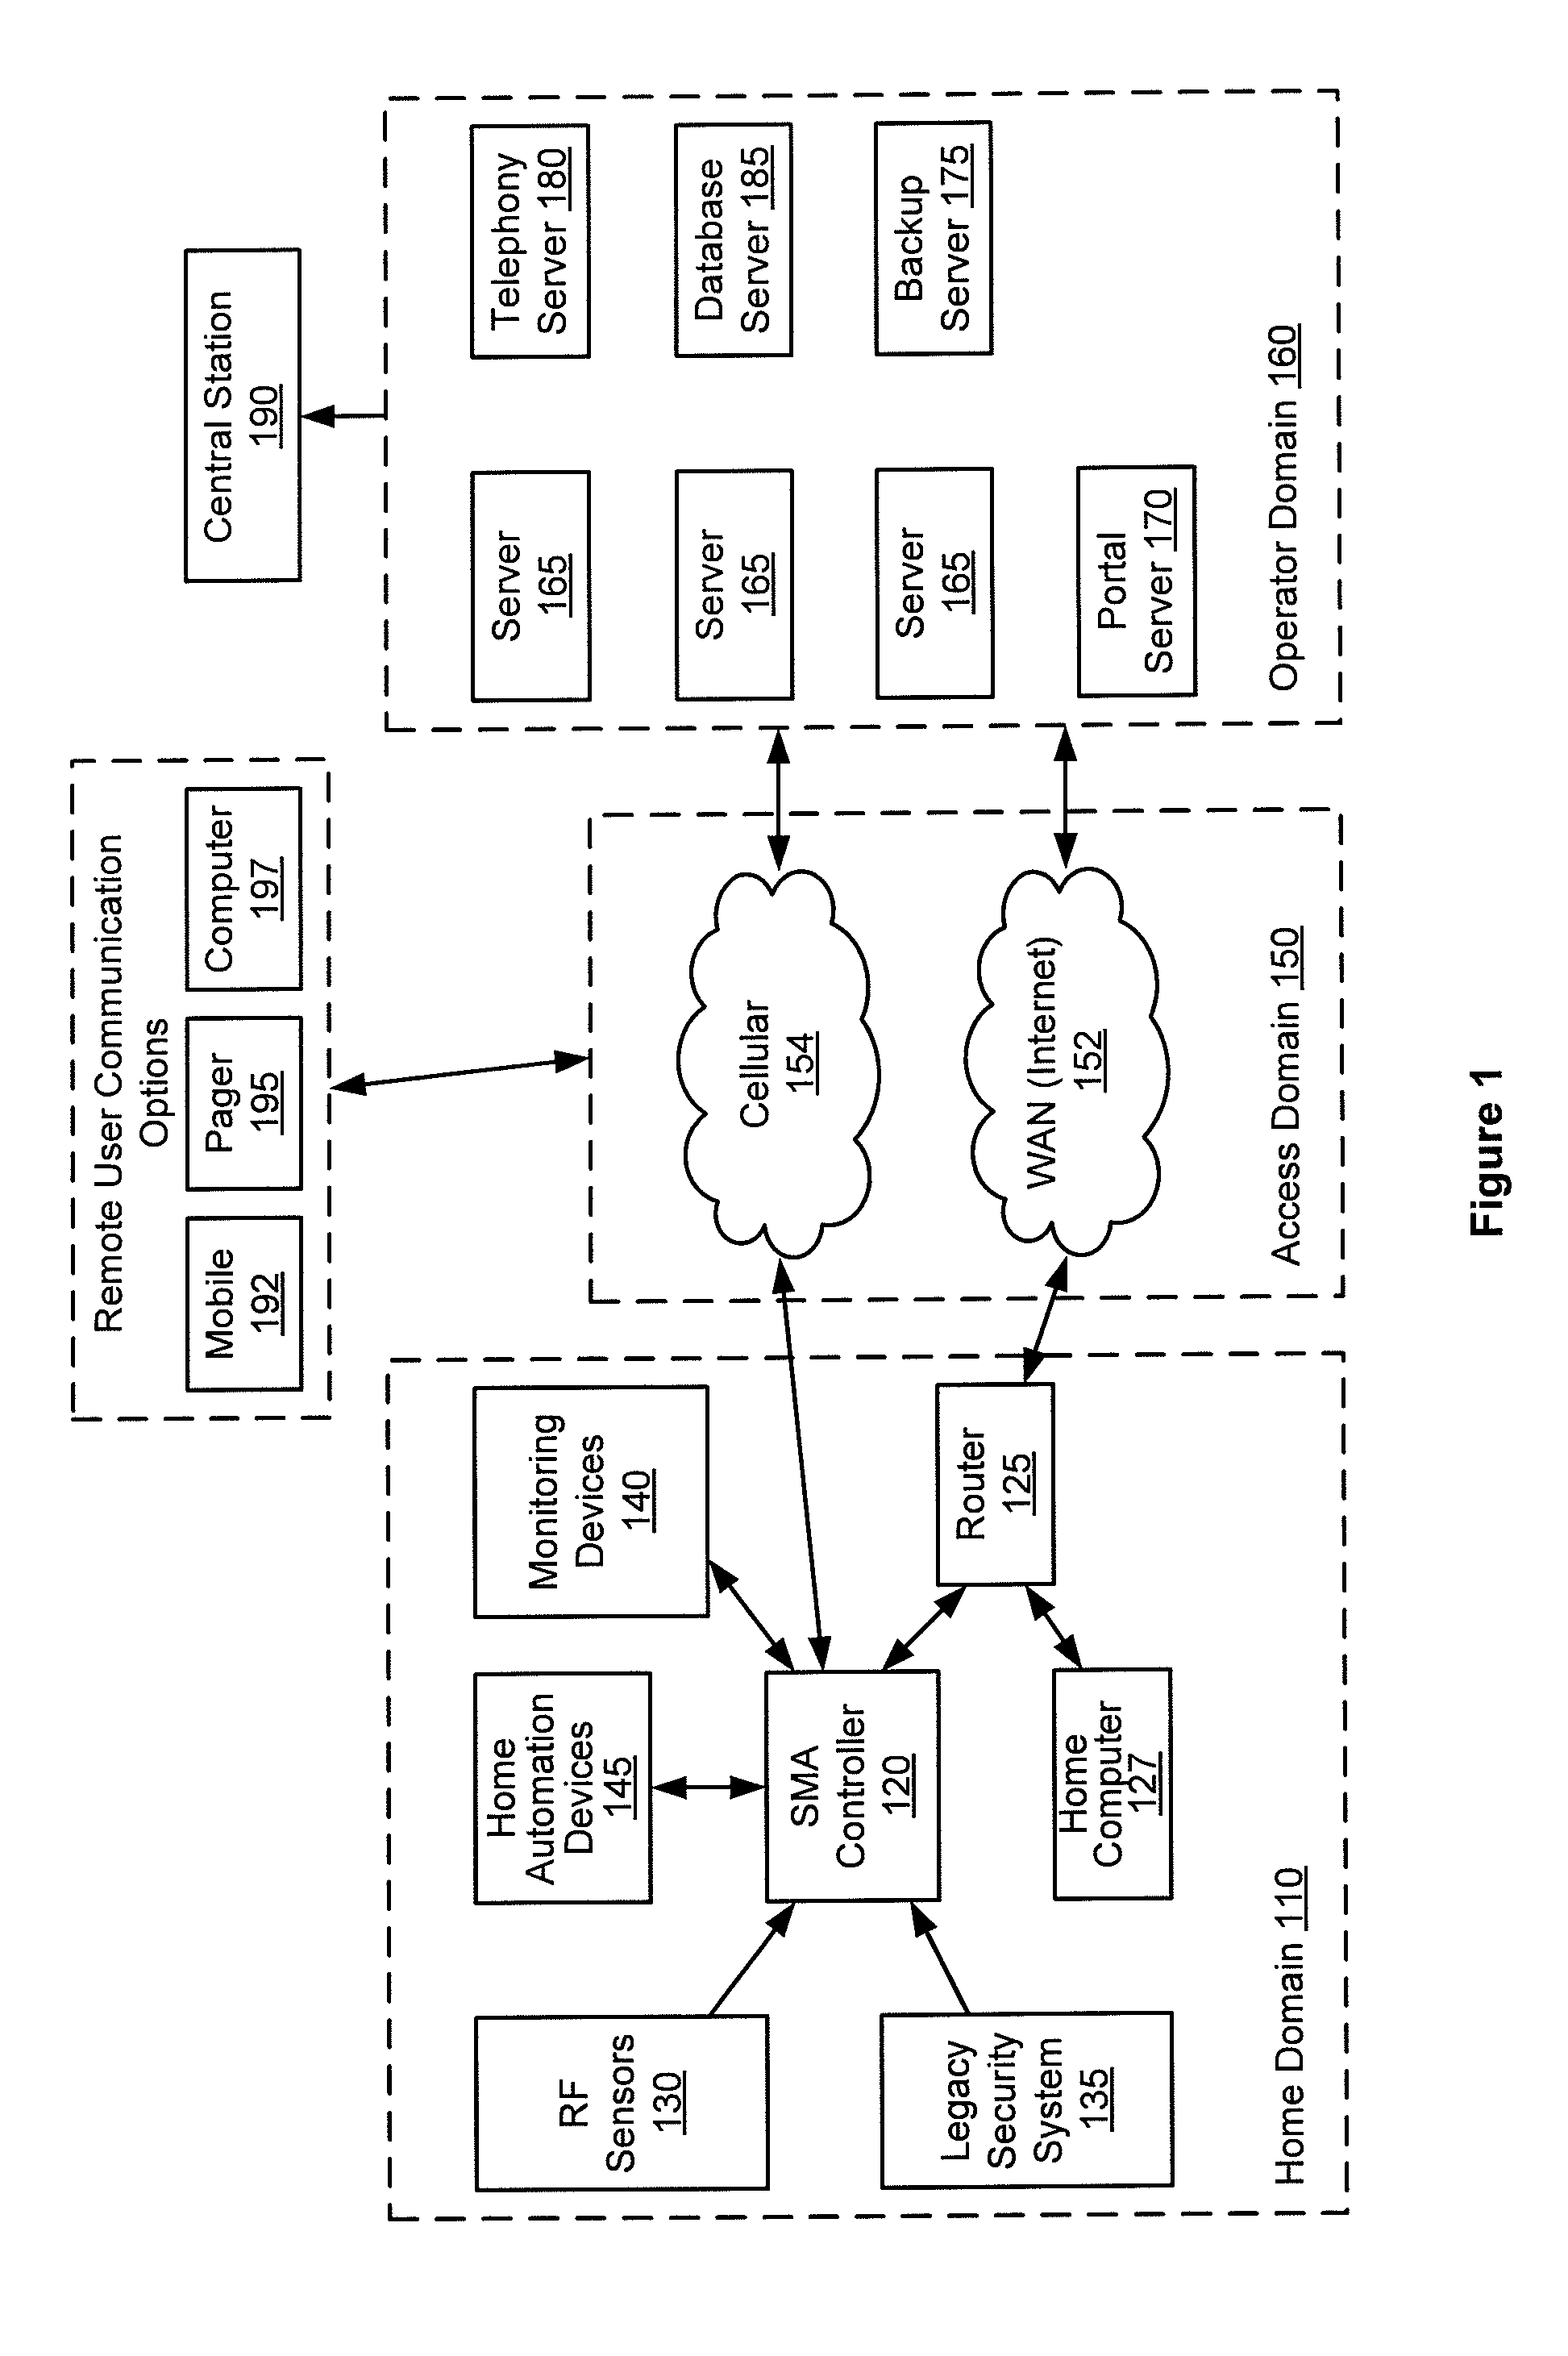 Method, system and apparatus for activation of a home security, monitoring and automation controller using remotely stored configuration data